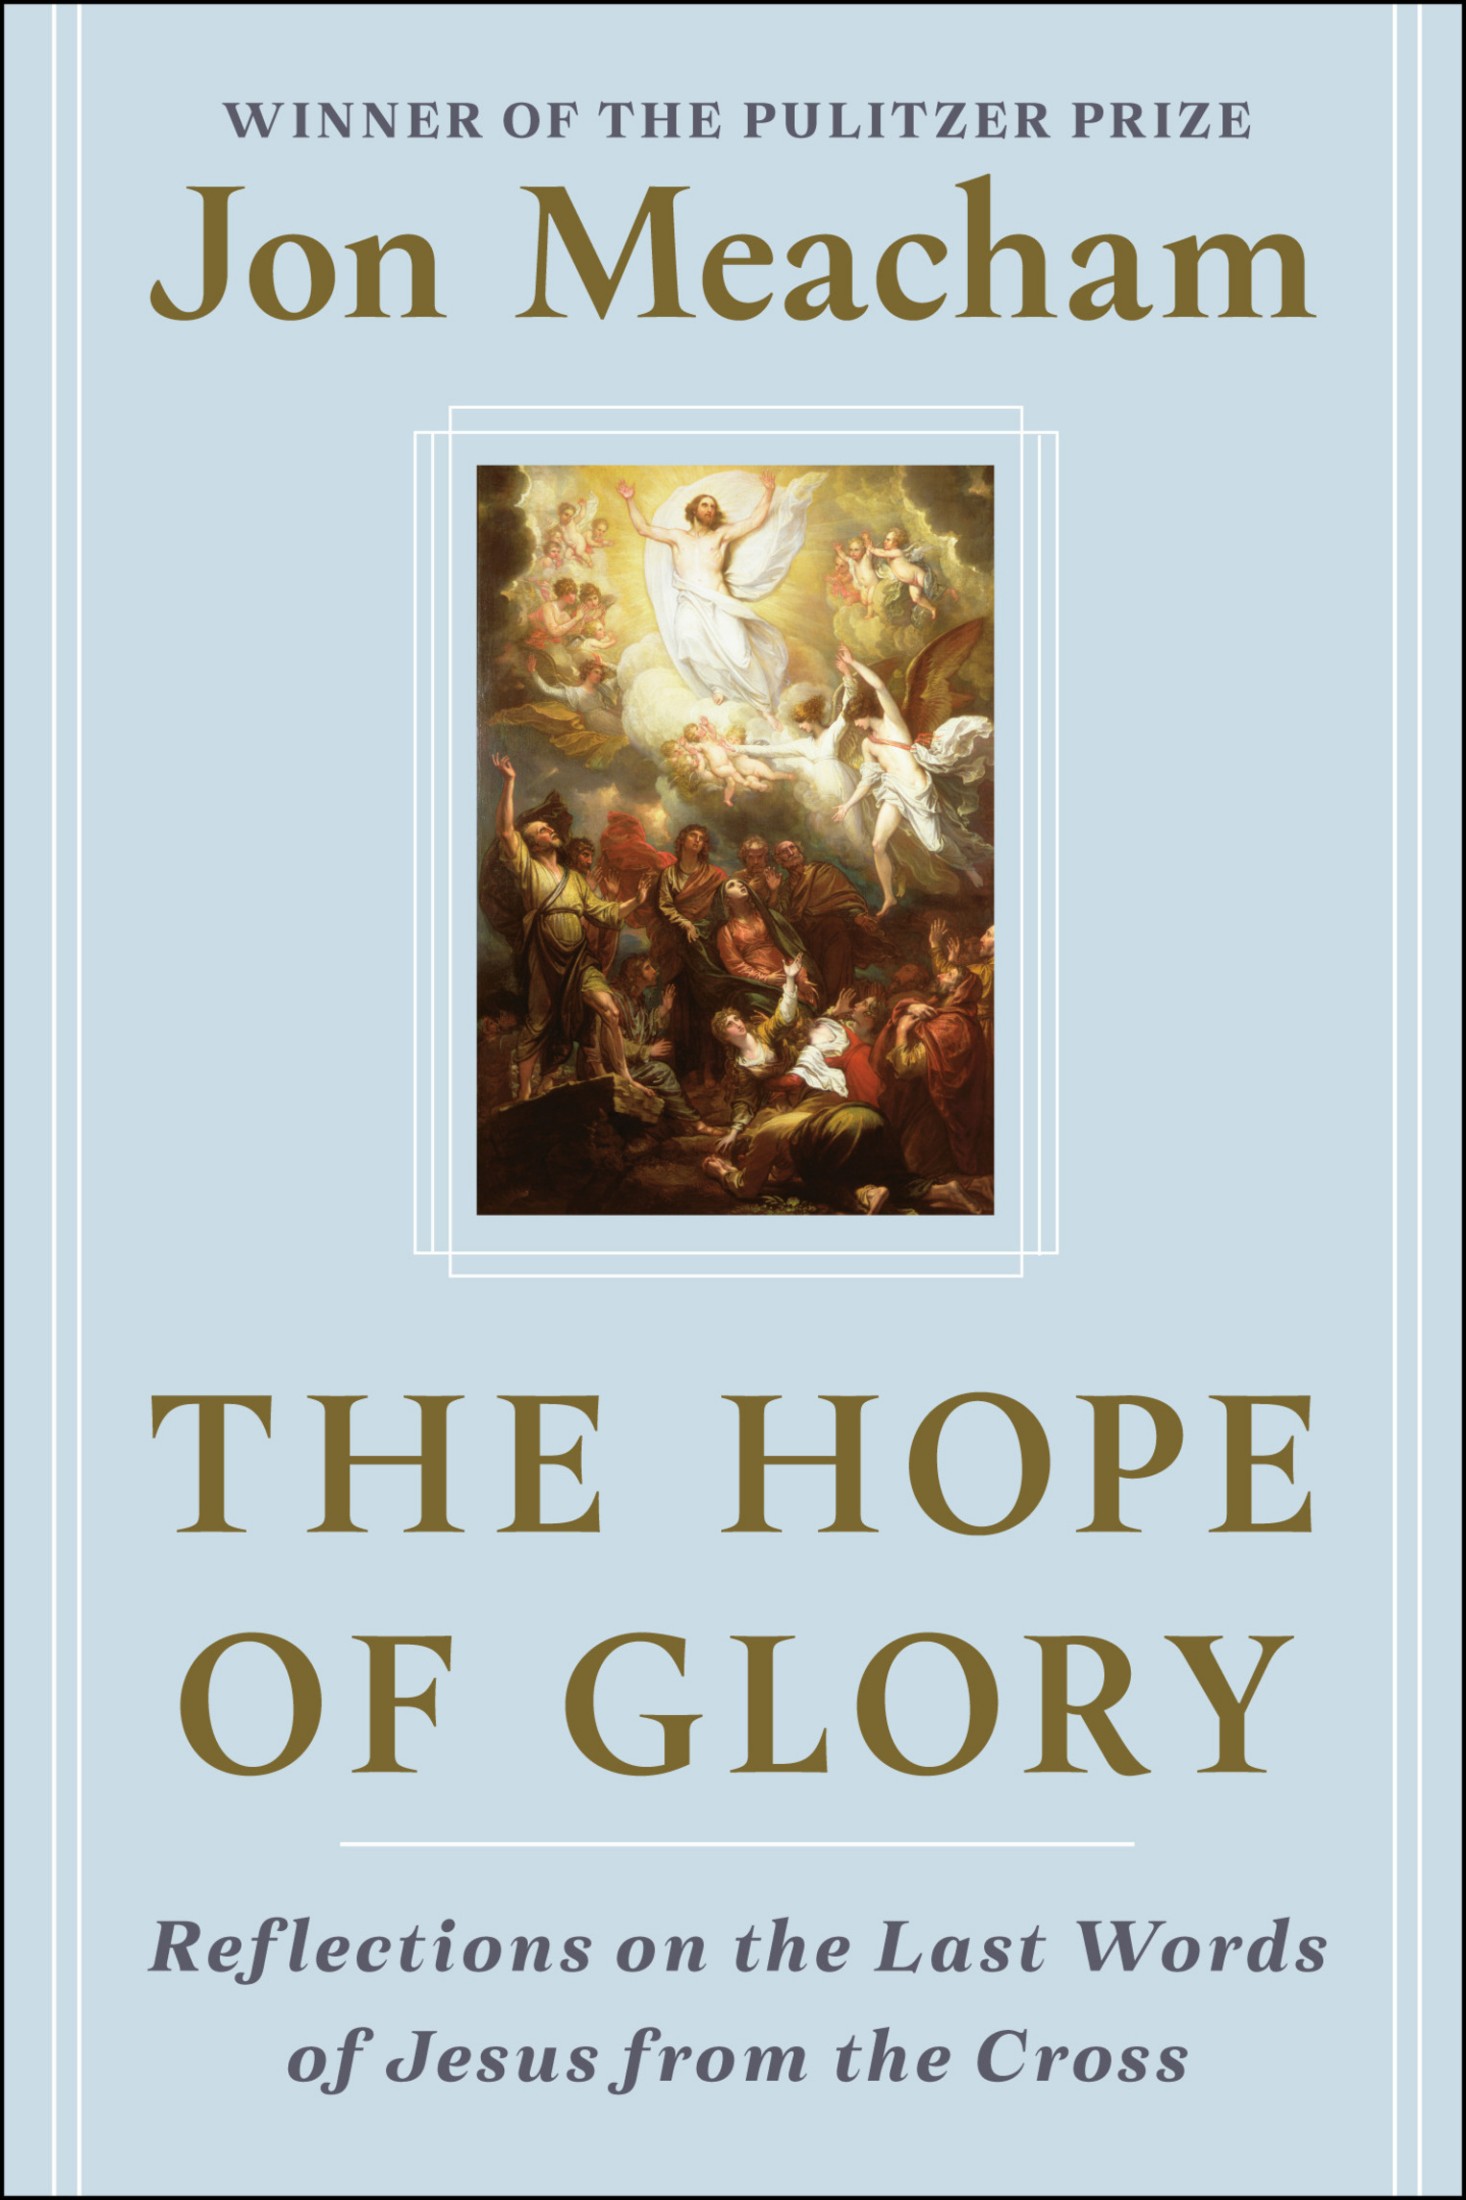 The Hope of Glory: Reflections on the Last Words of Jesus From the Cross